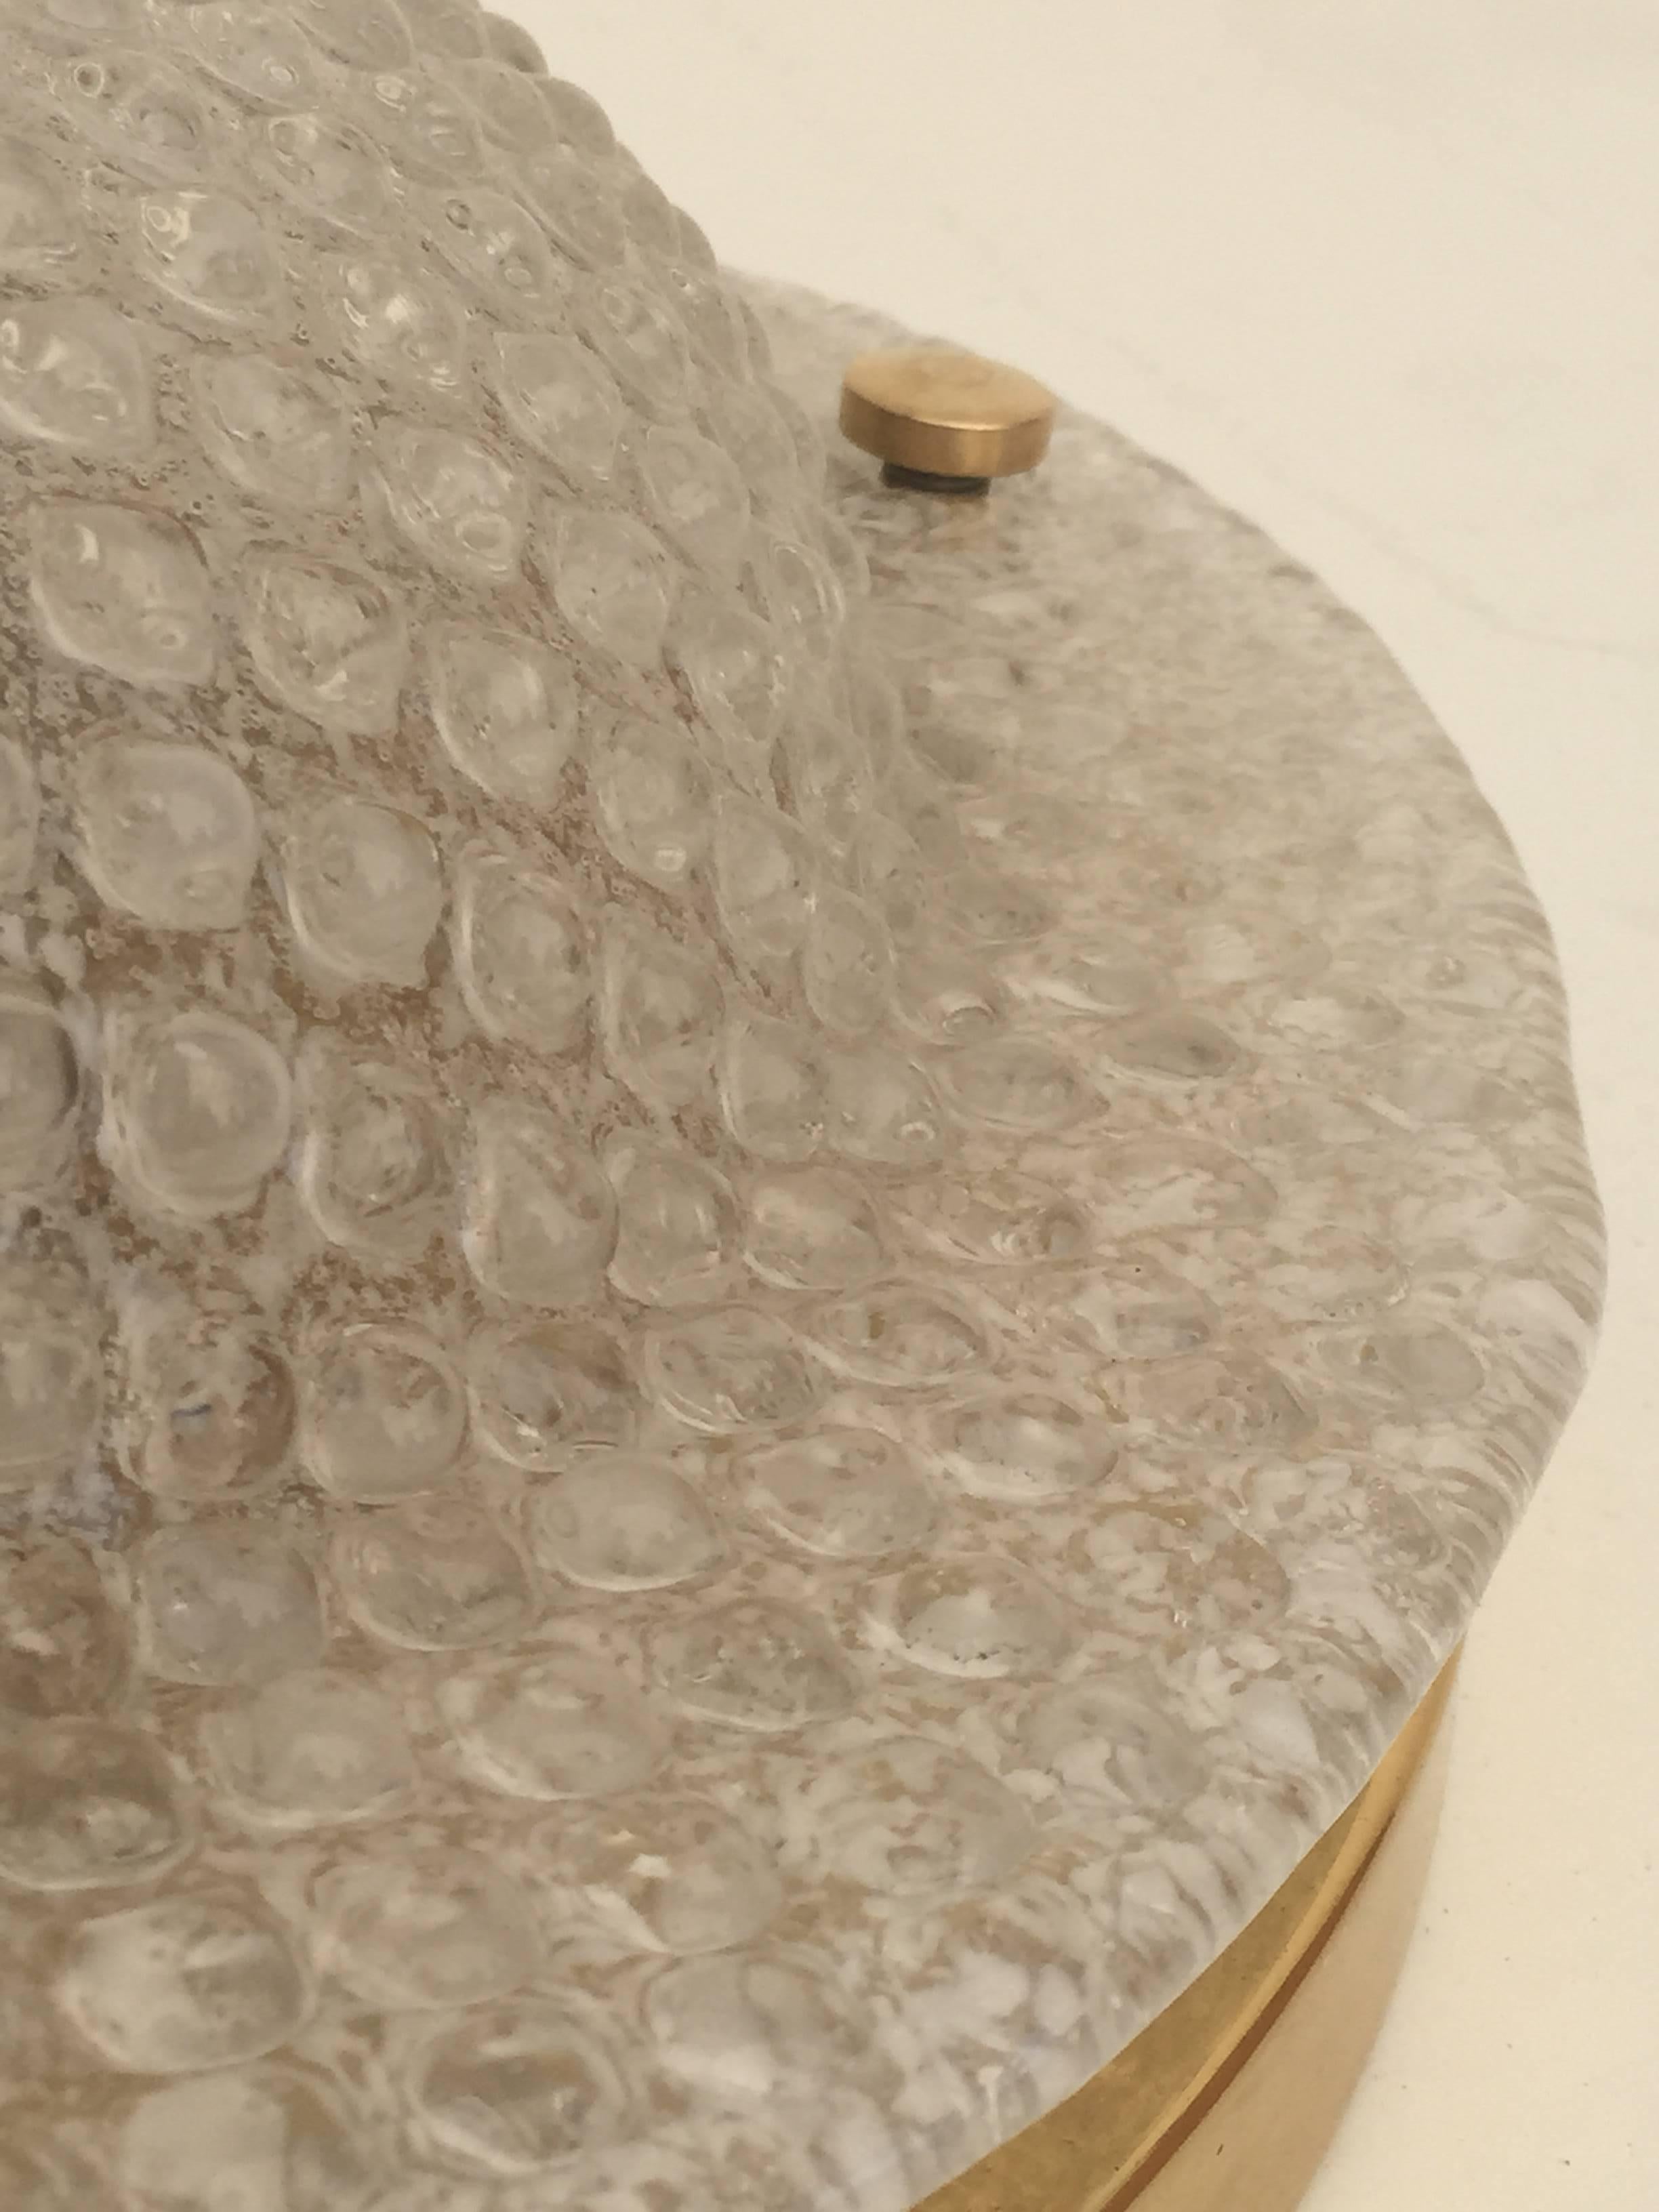 Textured Bubble Glass Fixture Attributed to Hillebrand 1